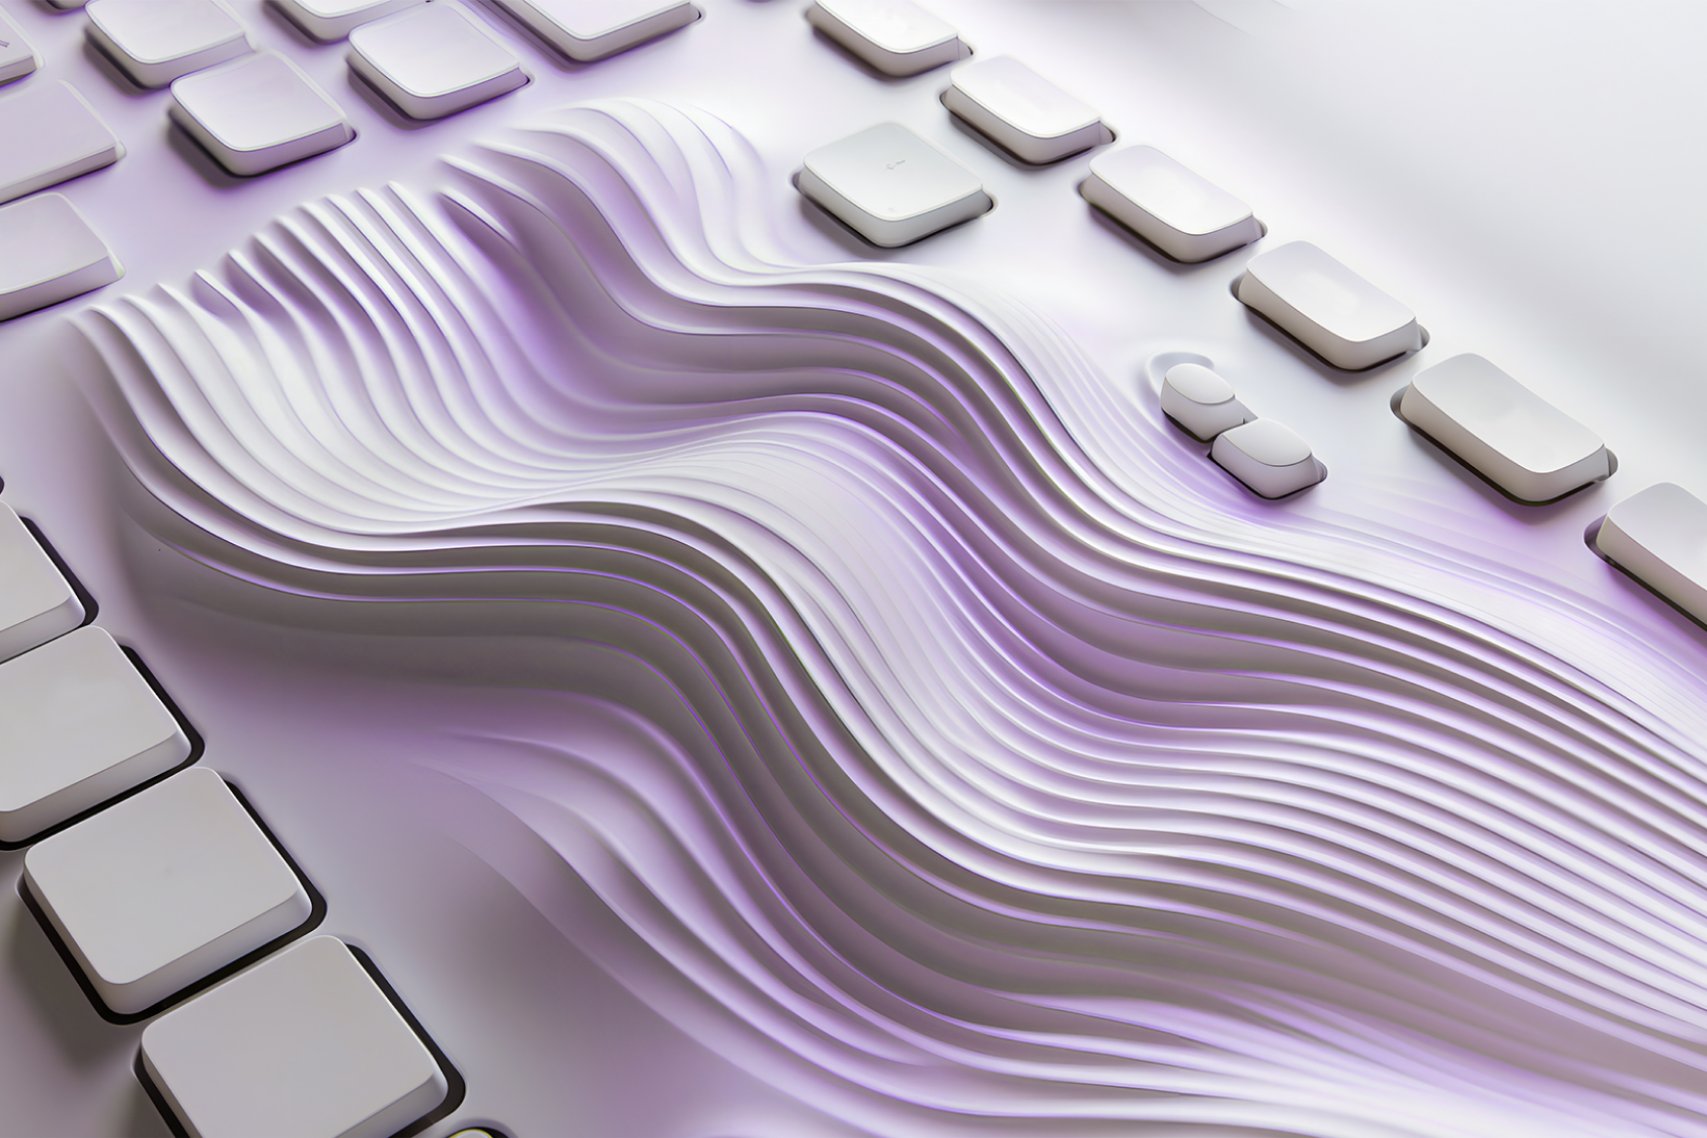 Swirling of the keyboard's texture.